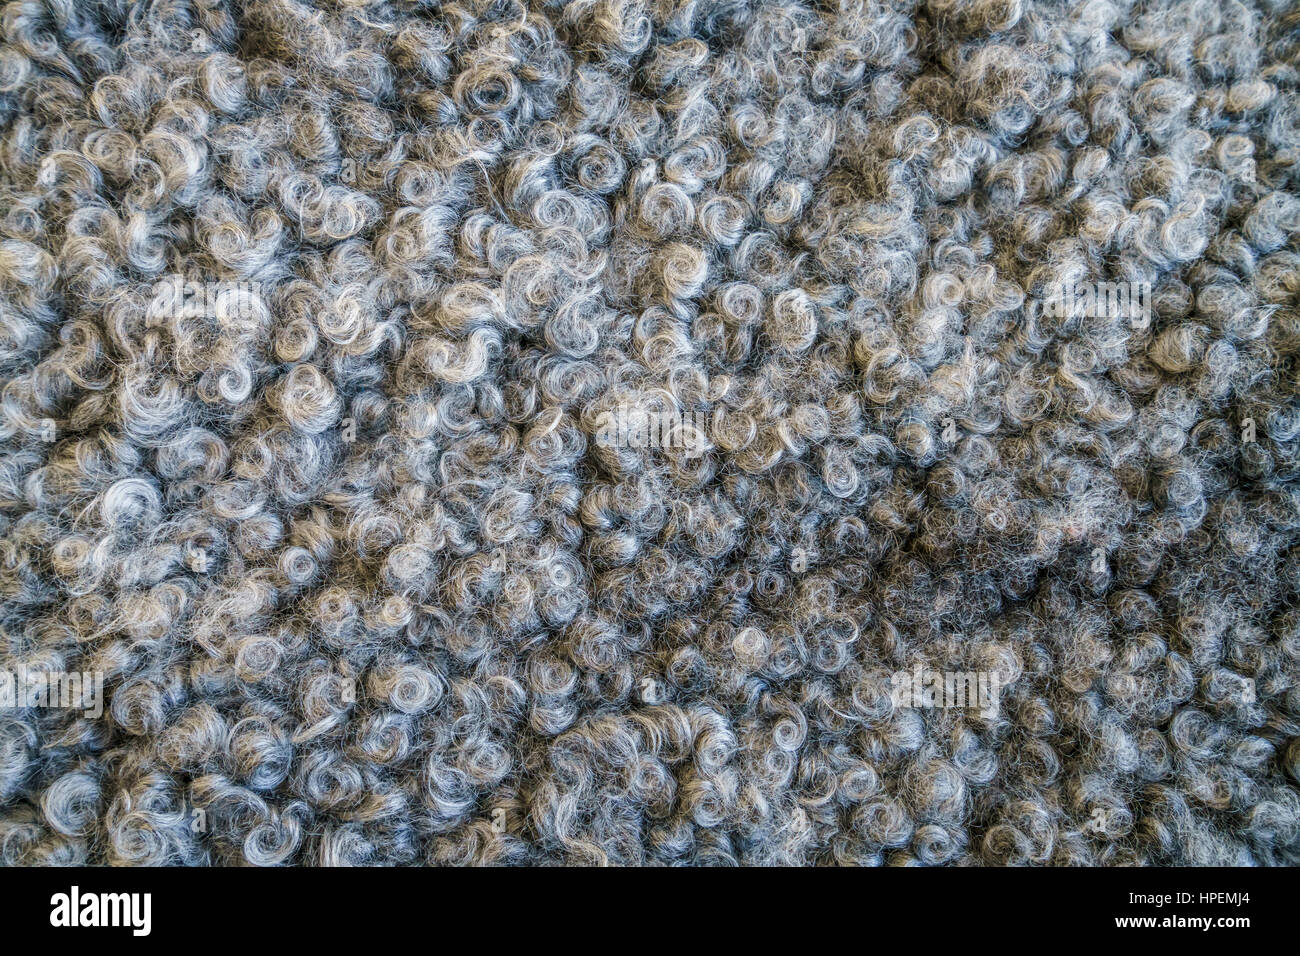 Blanket made of Lambs wool Stock Photo